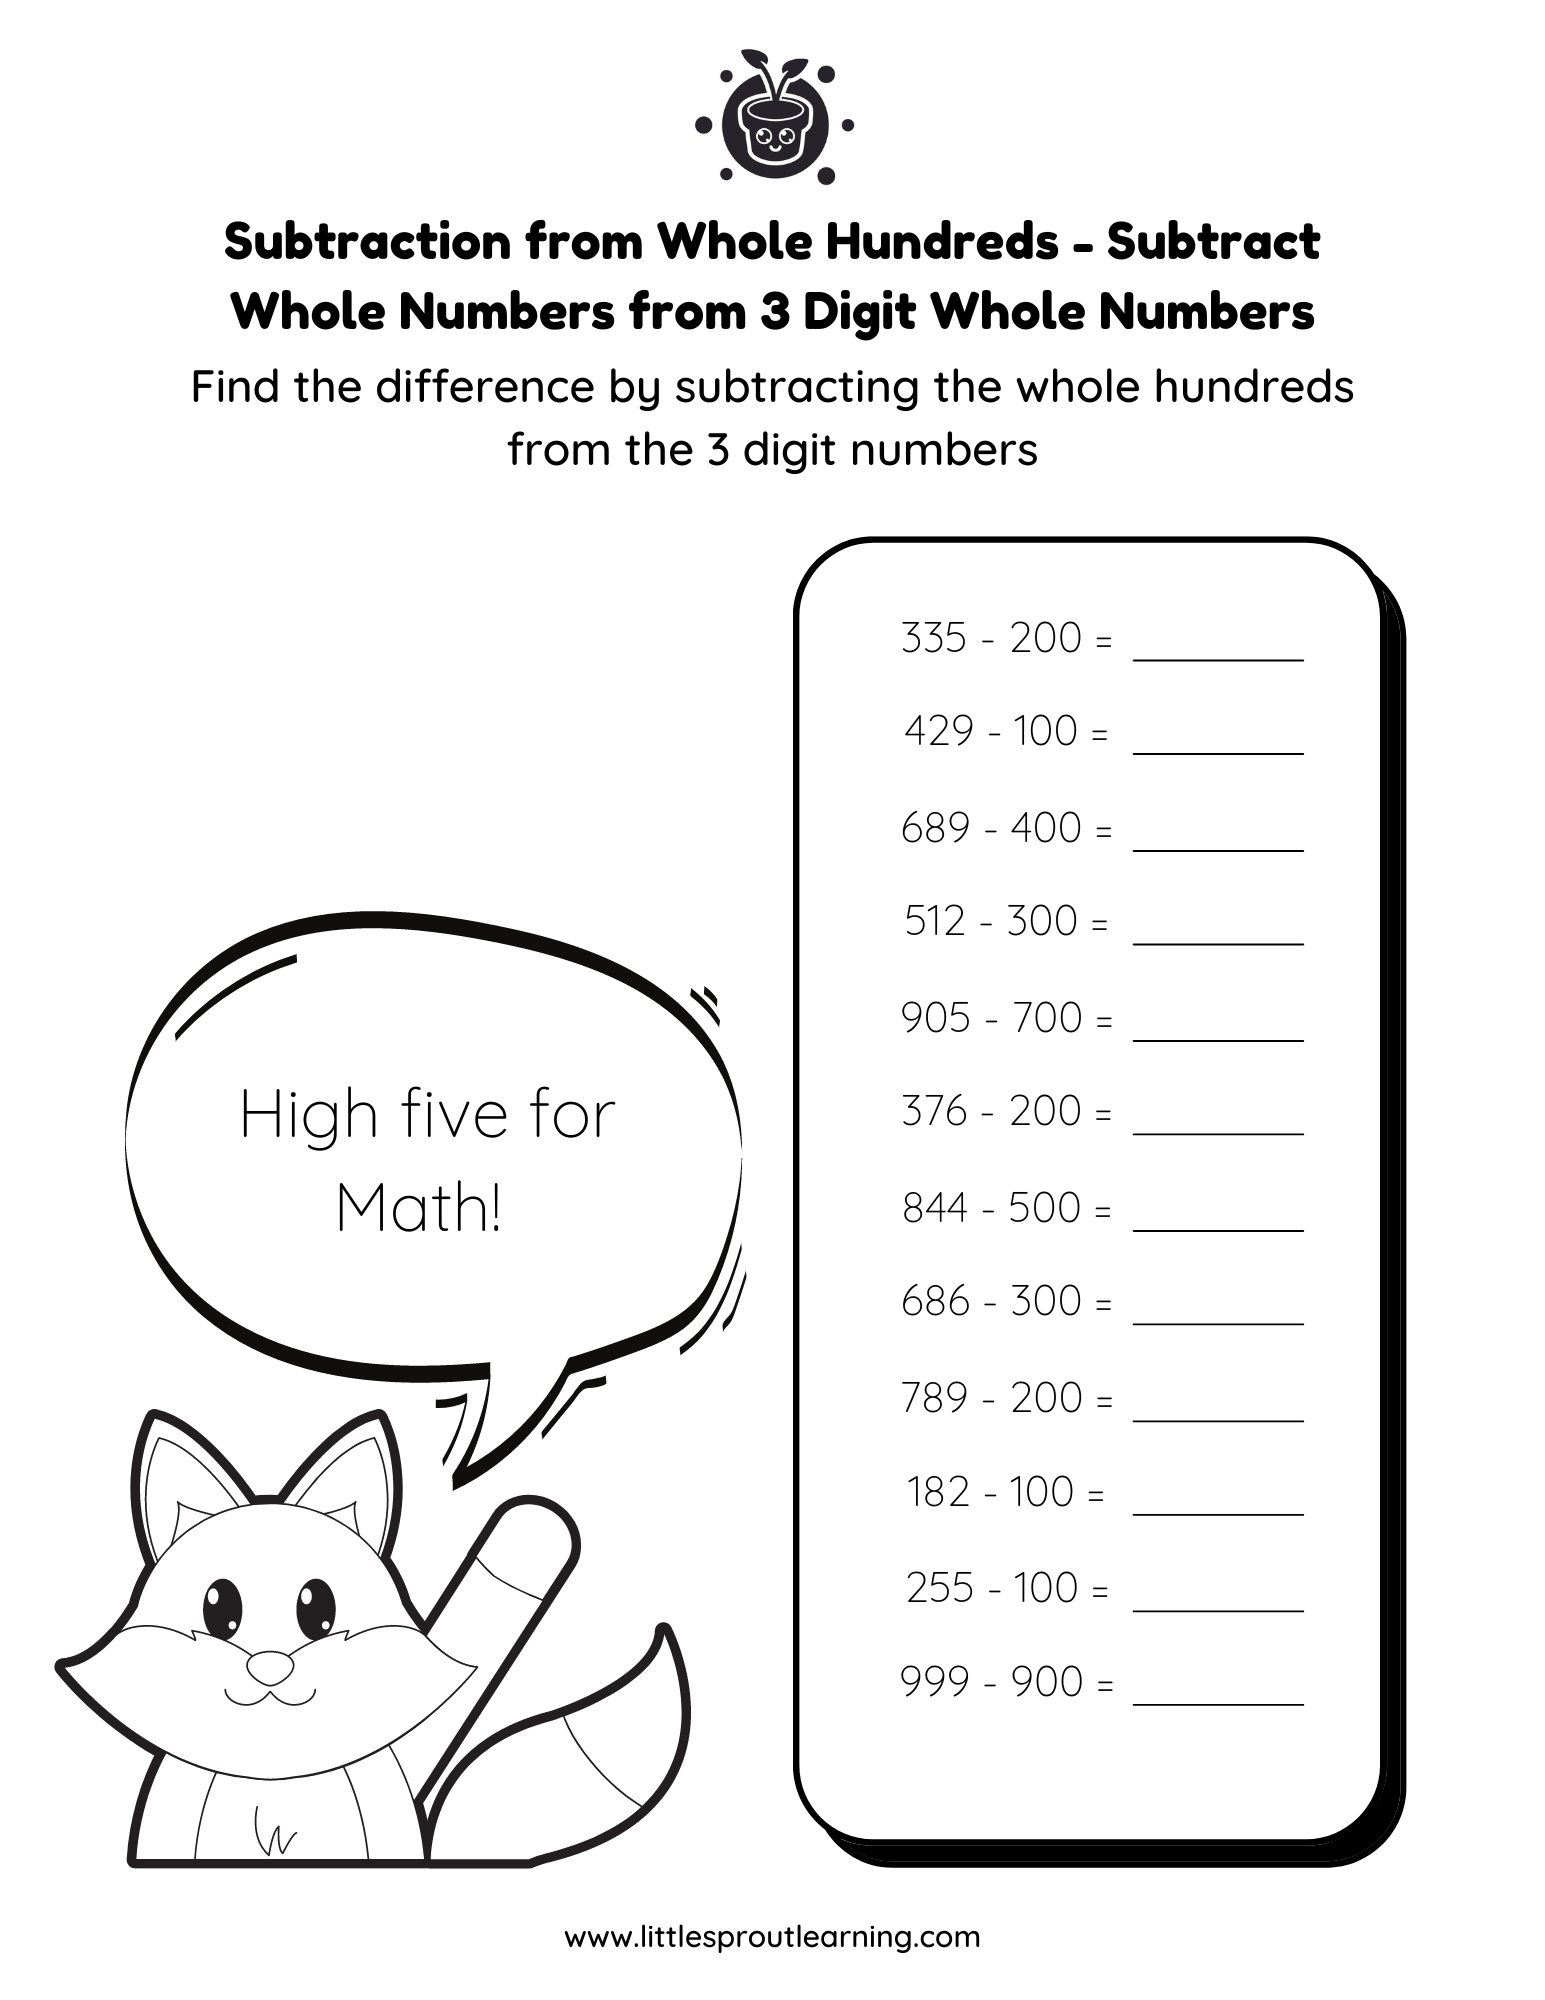 Whole Hundreds from 3 Digit Whole Numbers